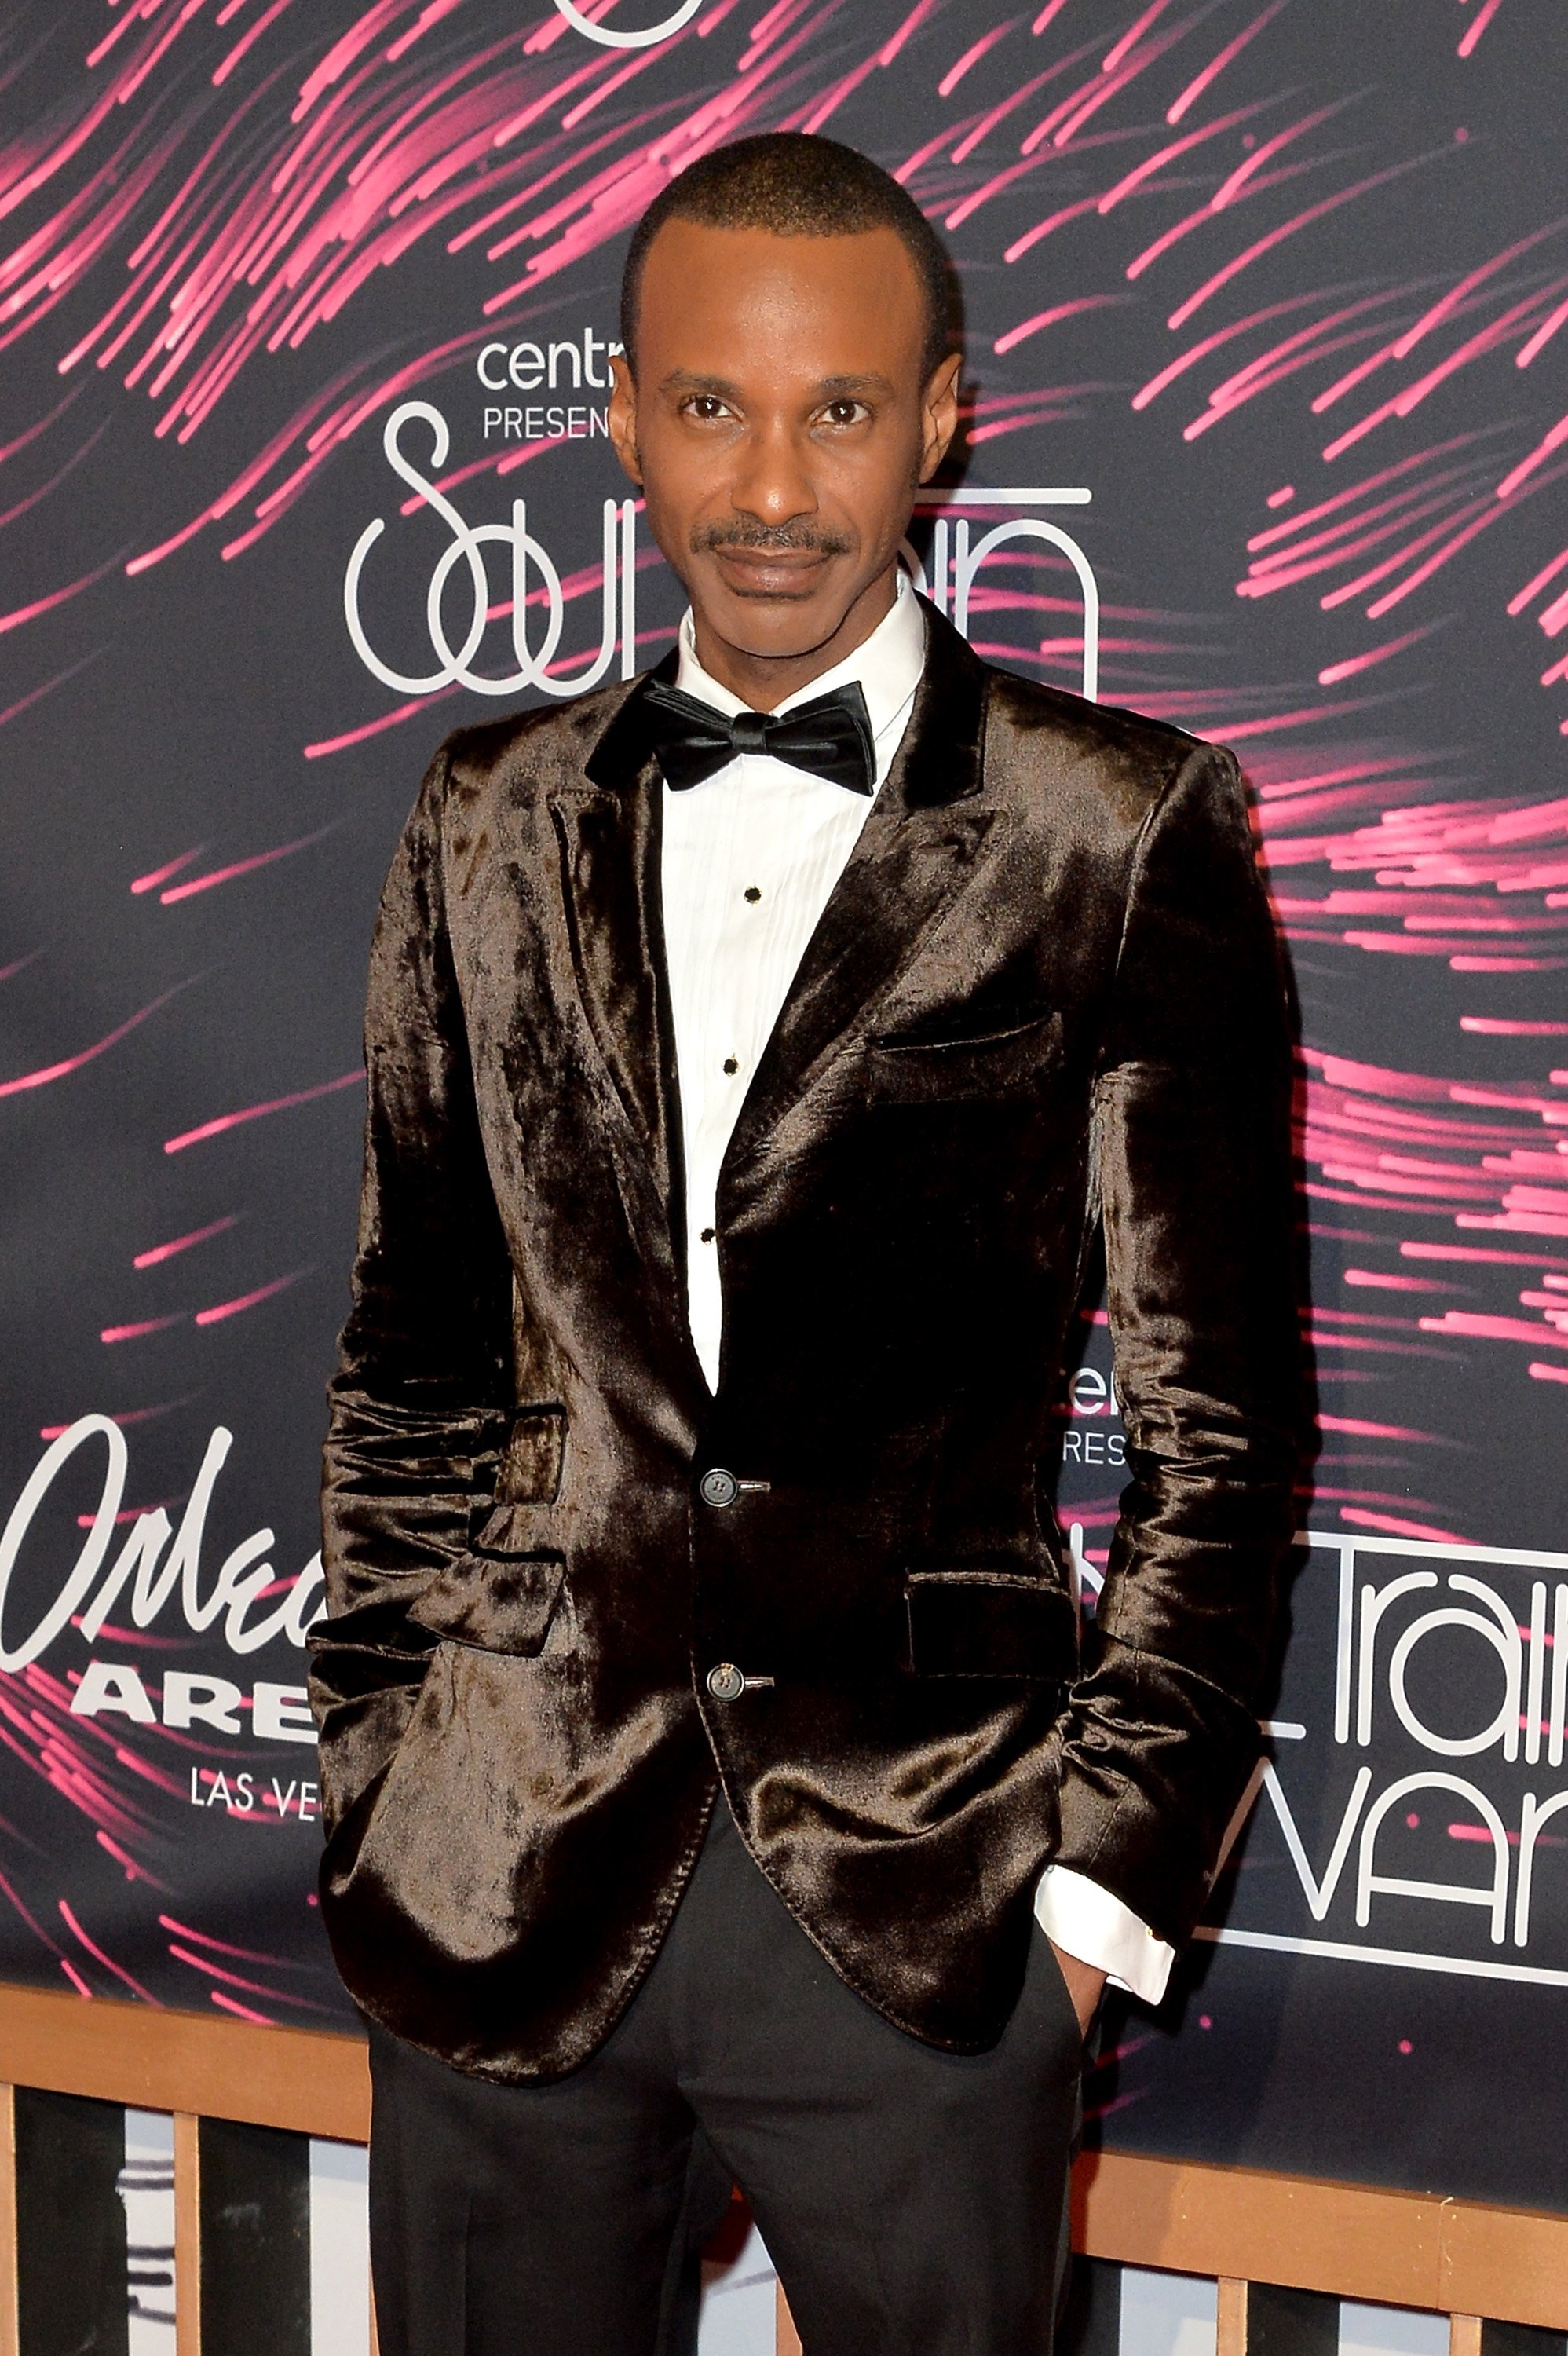 Singer Tevin Campbell Let the Cat out of the Bag Once, Admitting He's